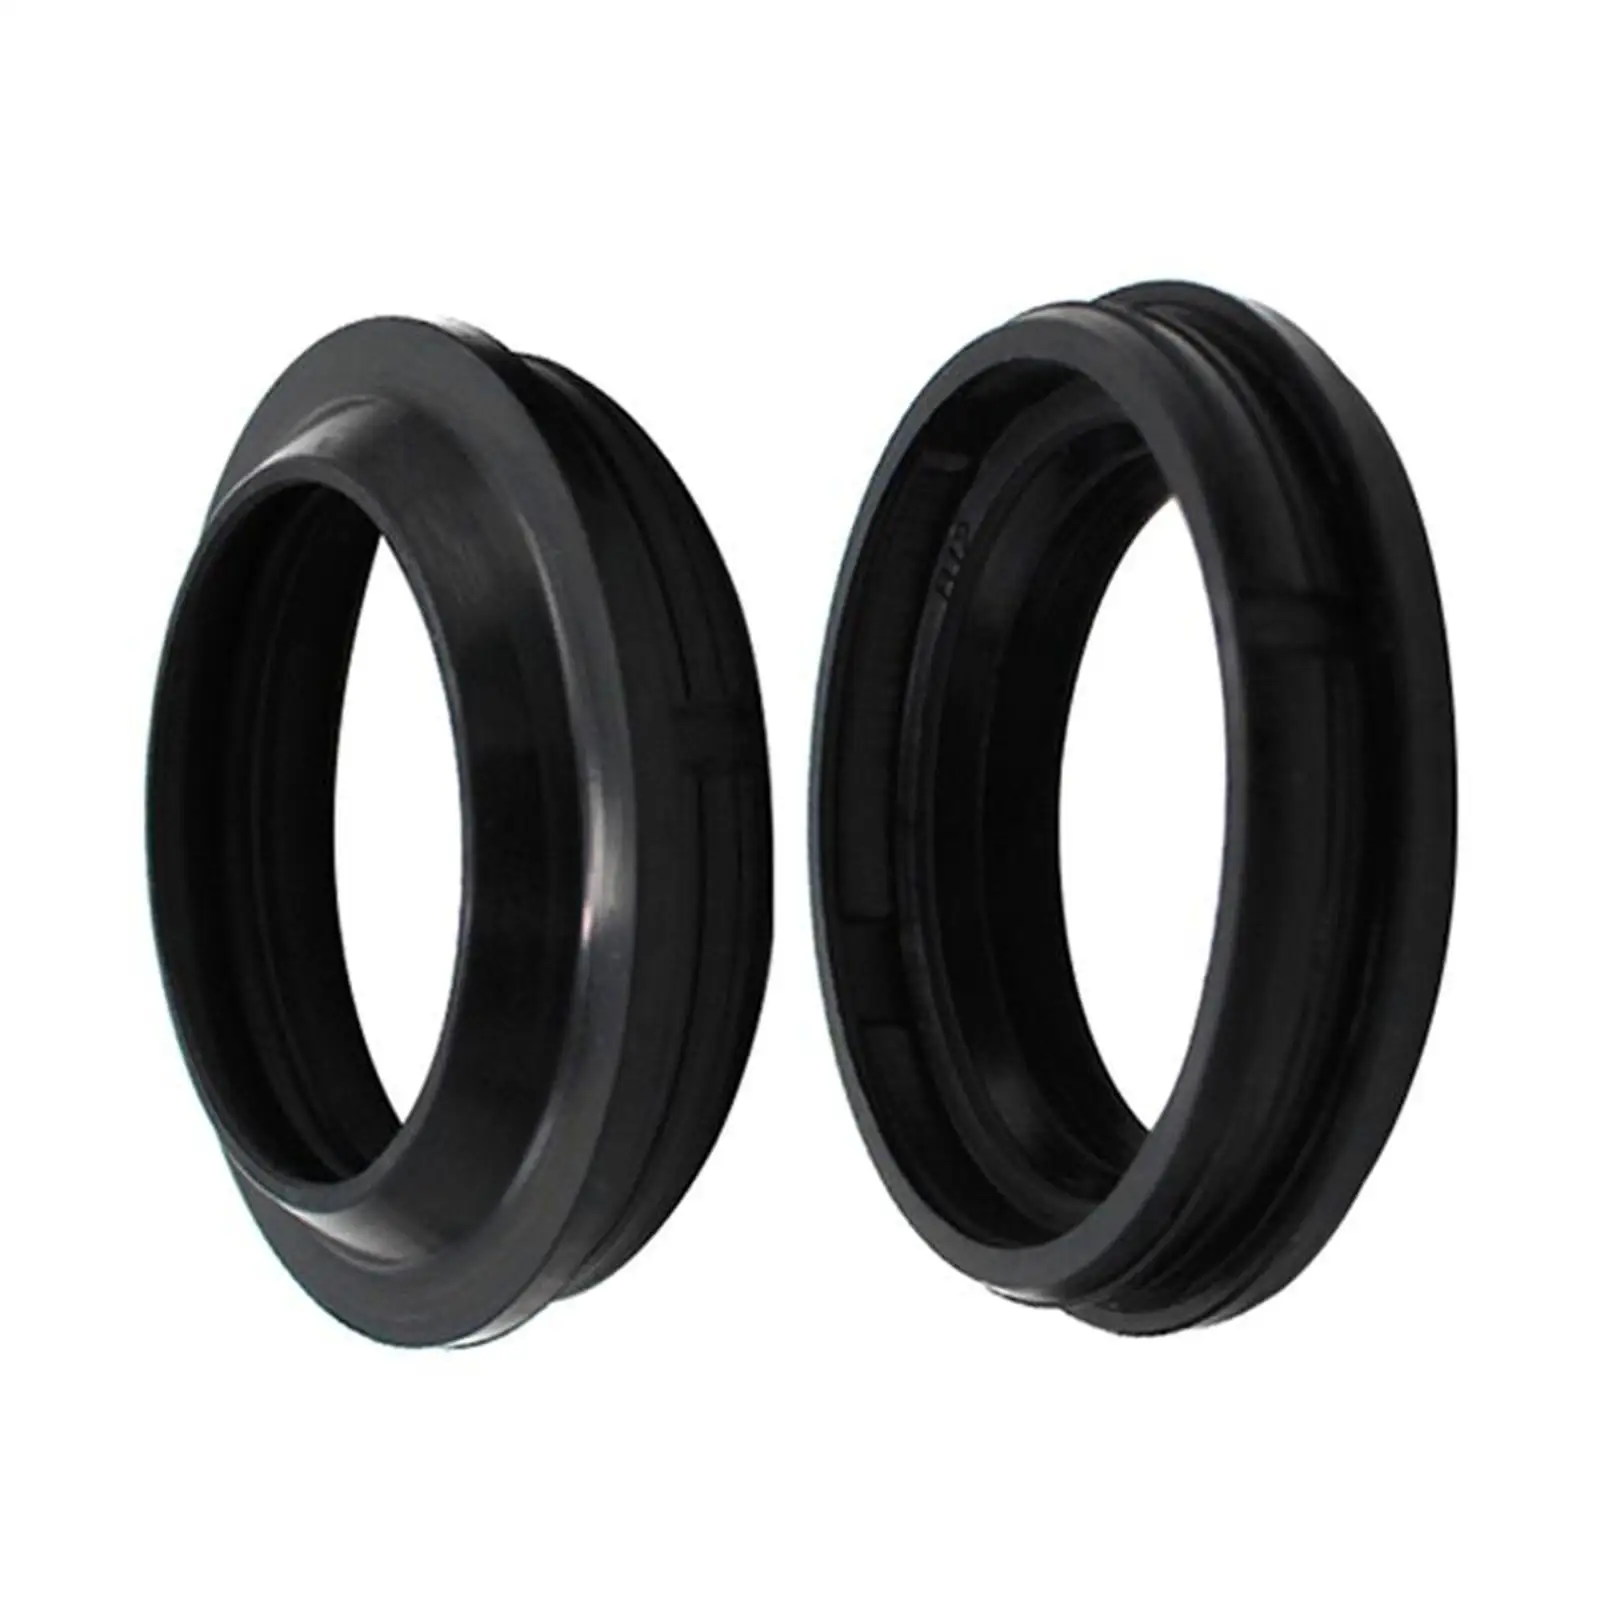 4 Pieces 36x48x11mm Durable Motorcycle Front Fork Damper Oil Seal and Dust Seal for Yamaha XT 125 R Bra 2007 1D4-f2480-00